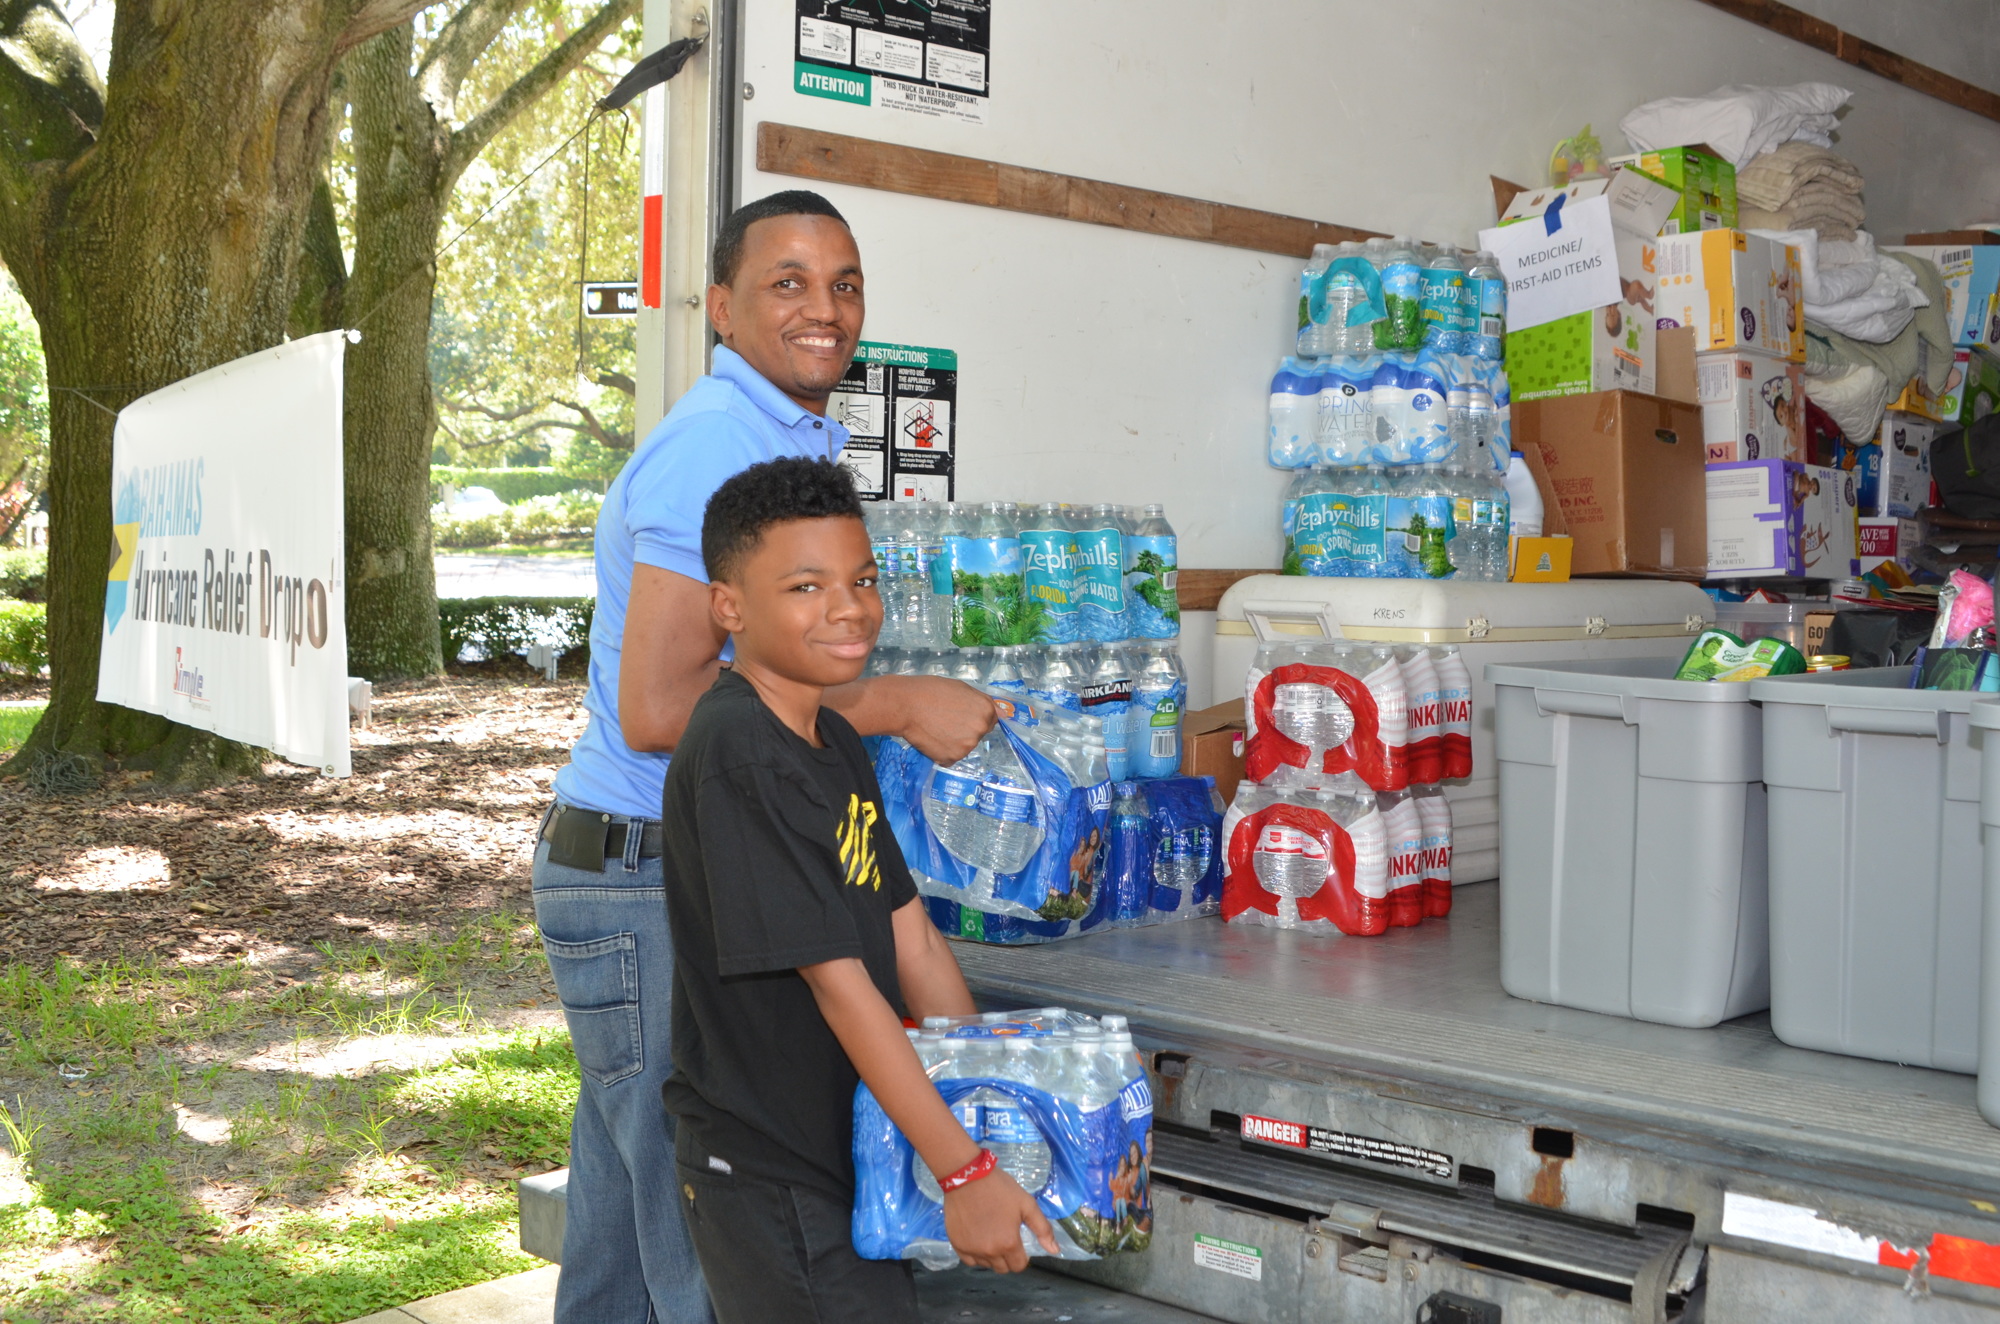 Lamont Wilson and his son, Justin, 13, helped fill the 26-foot truck set up outside Windermere Town Hall. They donated cases of water to the relief effort because they wanted to bless someone in need, Wilson said.